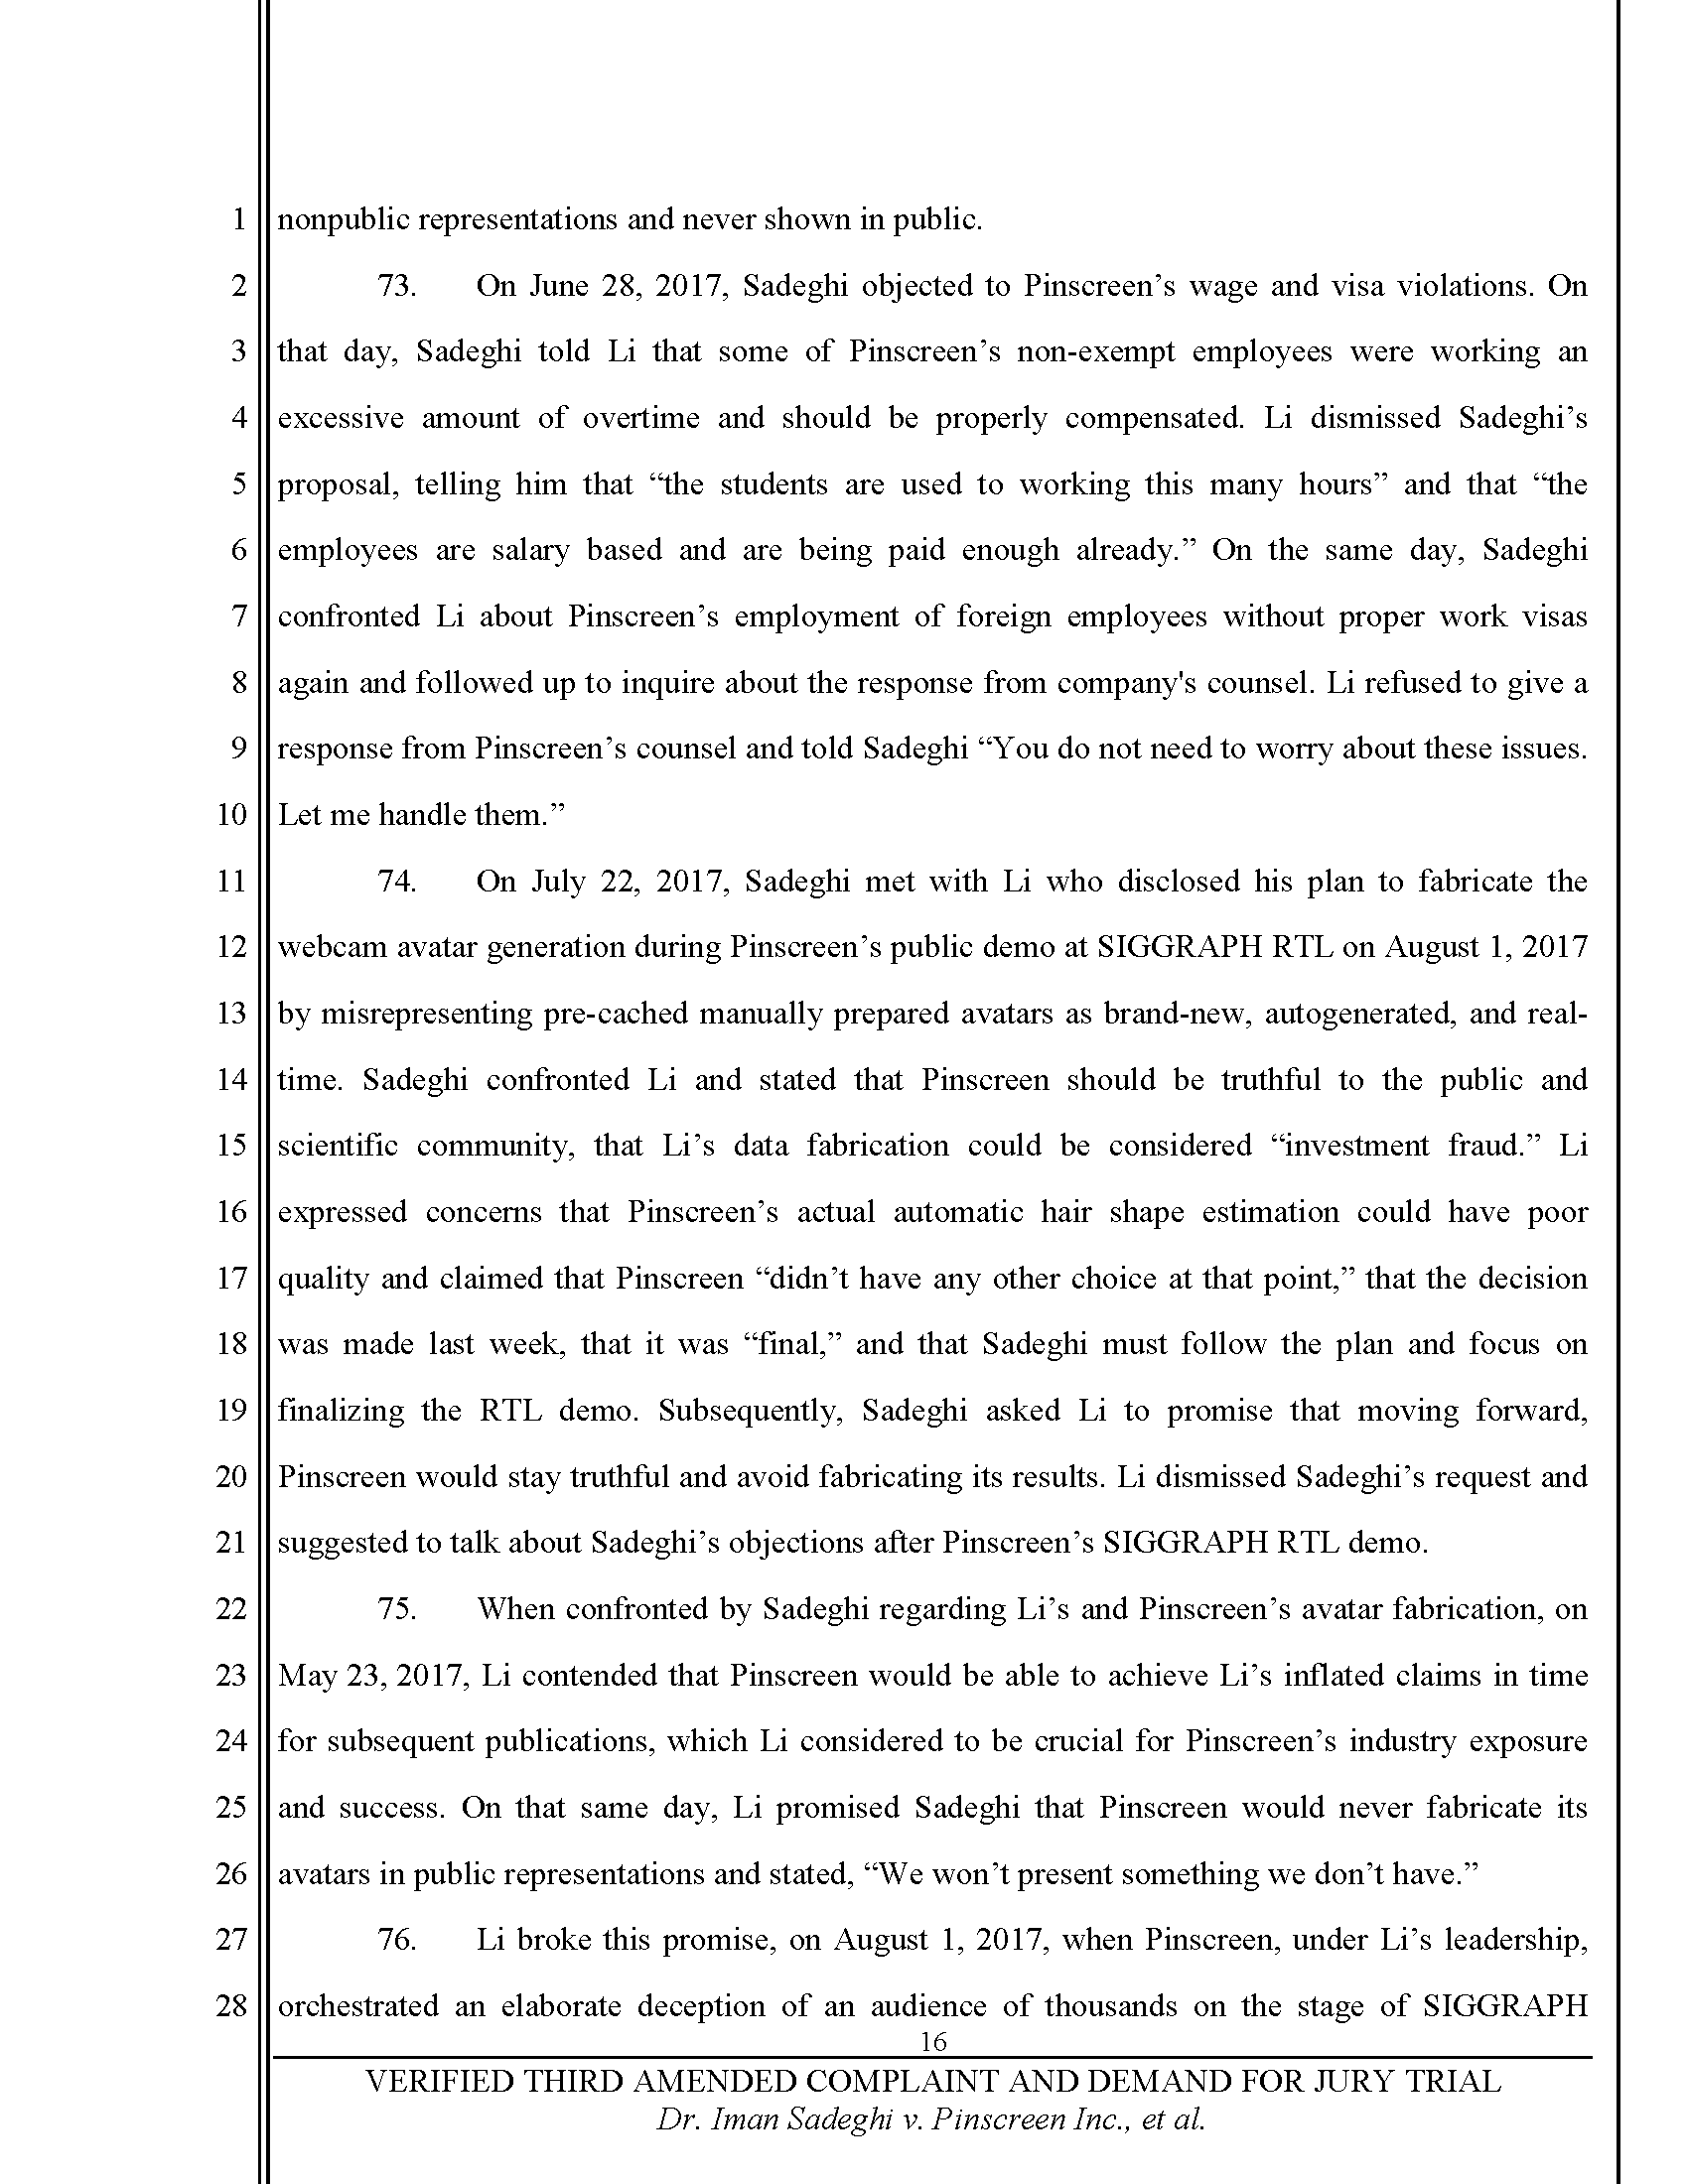 Third Amended Complaint (TAC) Page 17